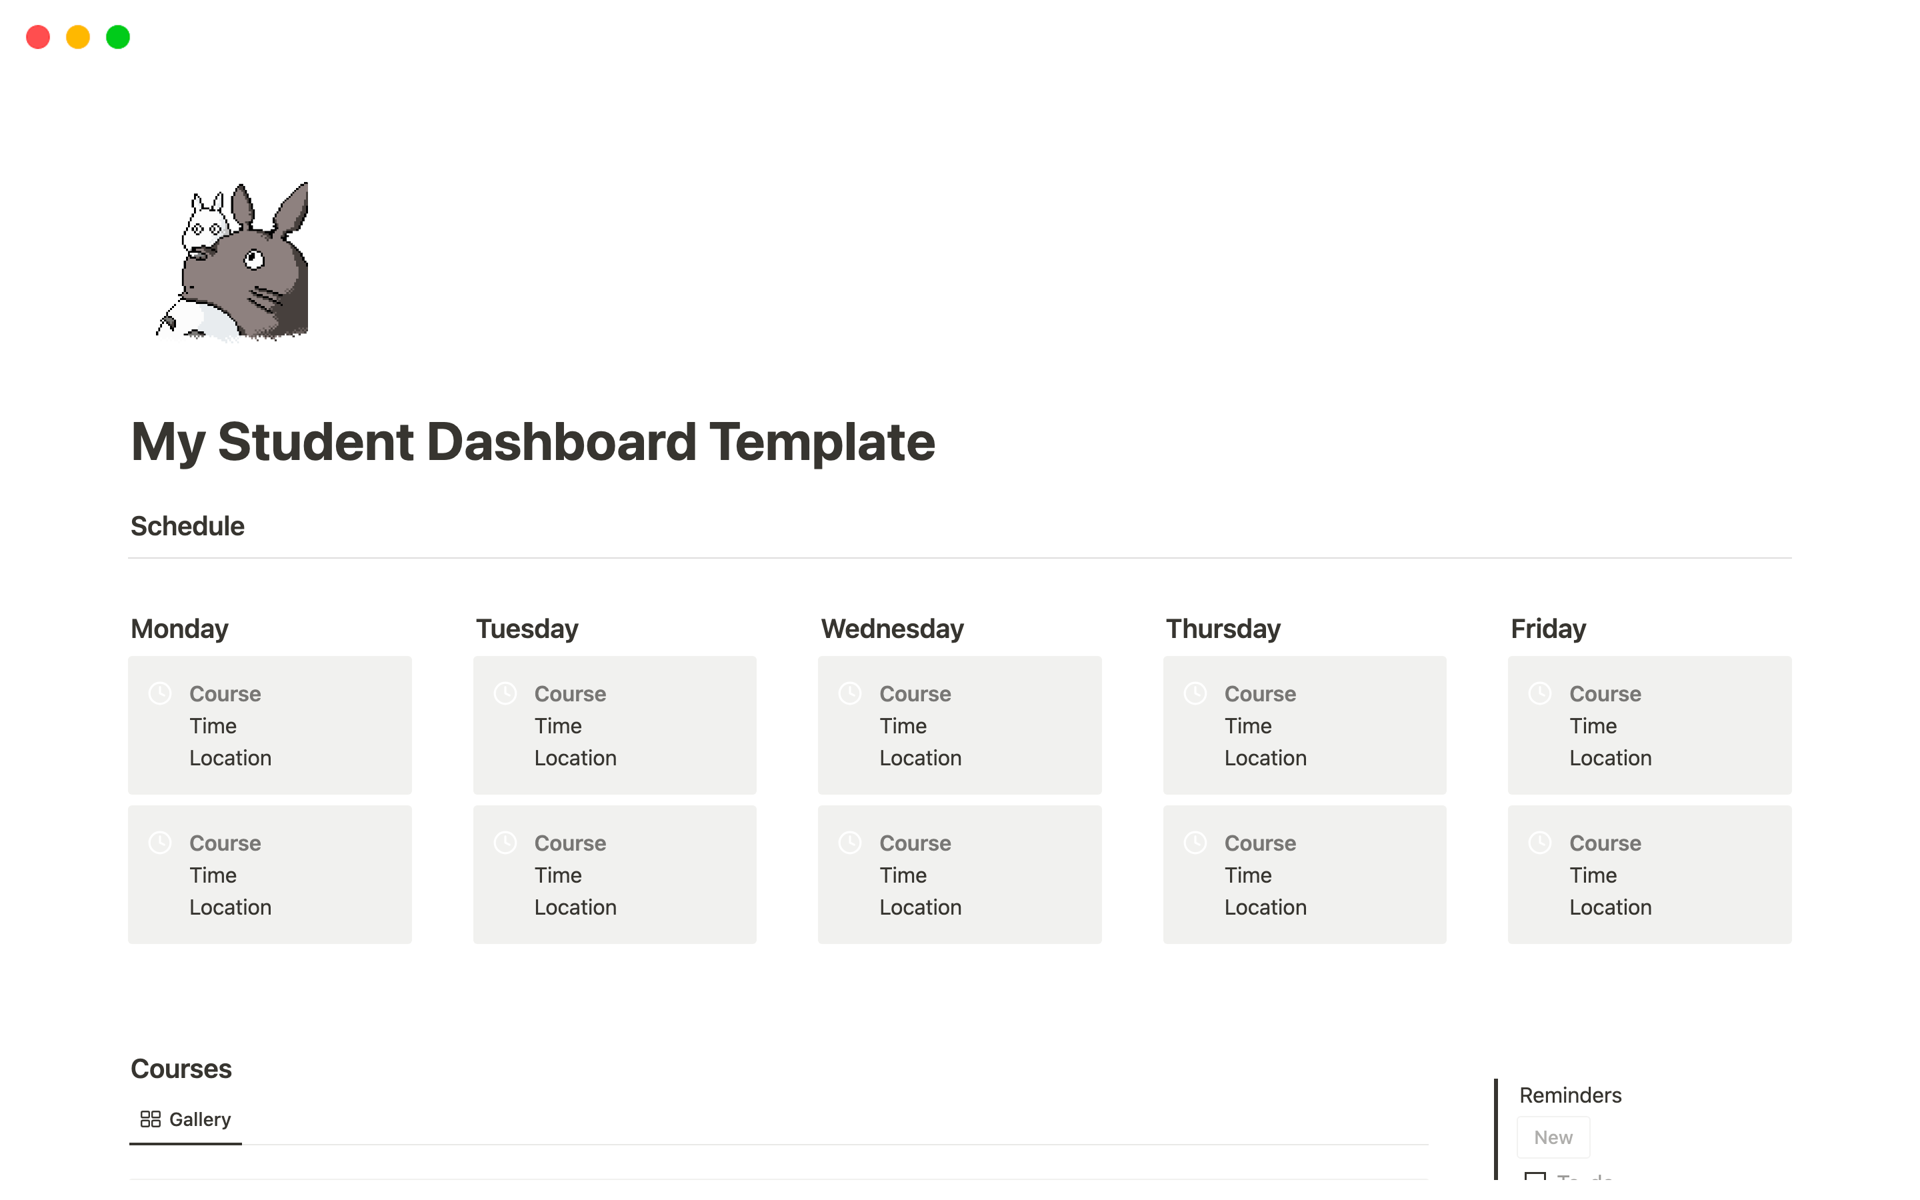 This template is not only designed to easily view courses, course assignments and tasks, but also study effectively with time management techniques such as a Flowtime Log and a Pomodoro Timer. 